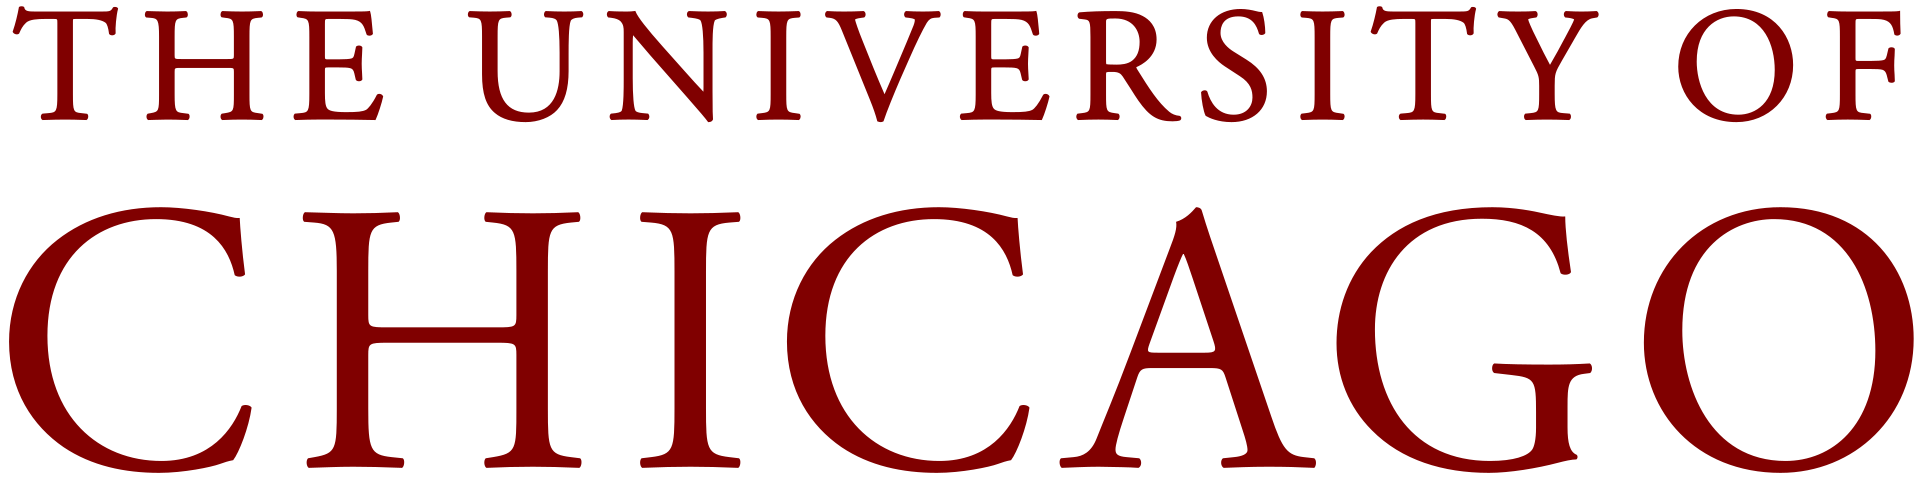 University of Chicago logo, By University of Chicago - http://communications.uchicago.edu/sites/all/files/communications/identity/uchicago.identity.guidelines.pdf, Public Domain, https://commons.wikimedia.org/w/index.php?curid=66222713"